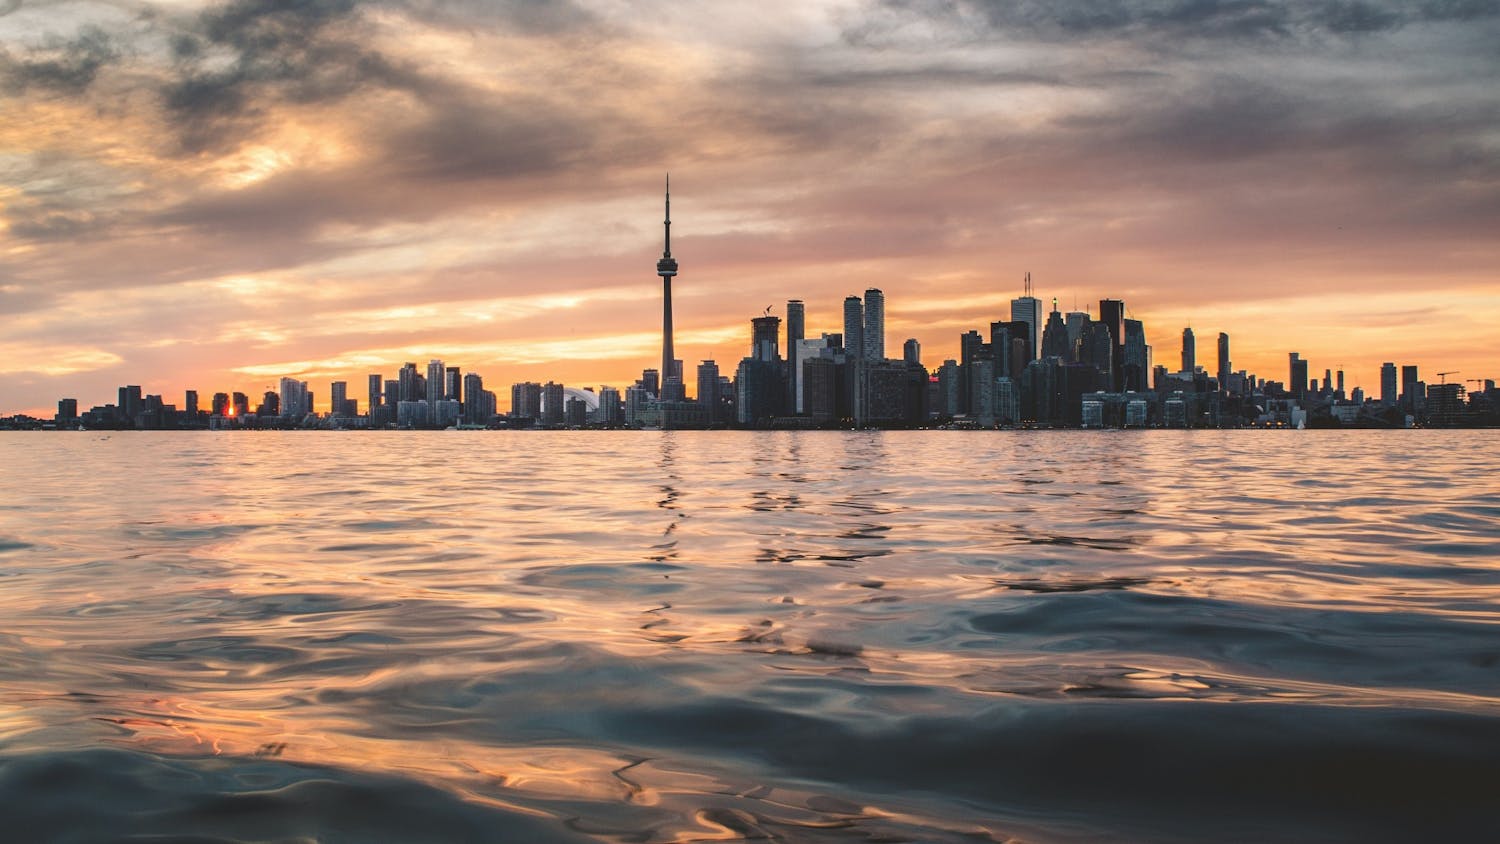 Toronto looms large over a body of water. Students should go to Canada with “literal strangers,” writes Reilly Mullen.